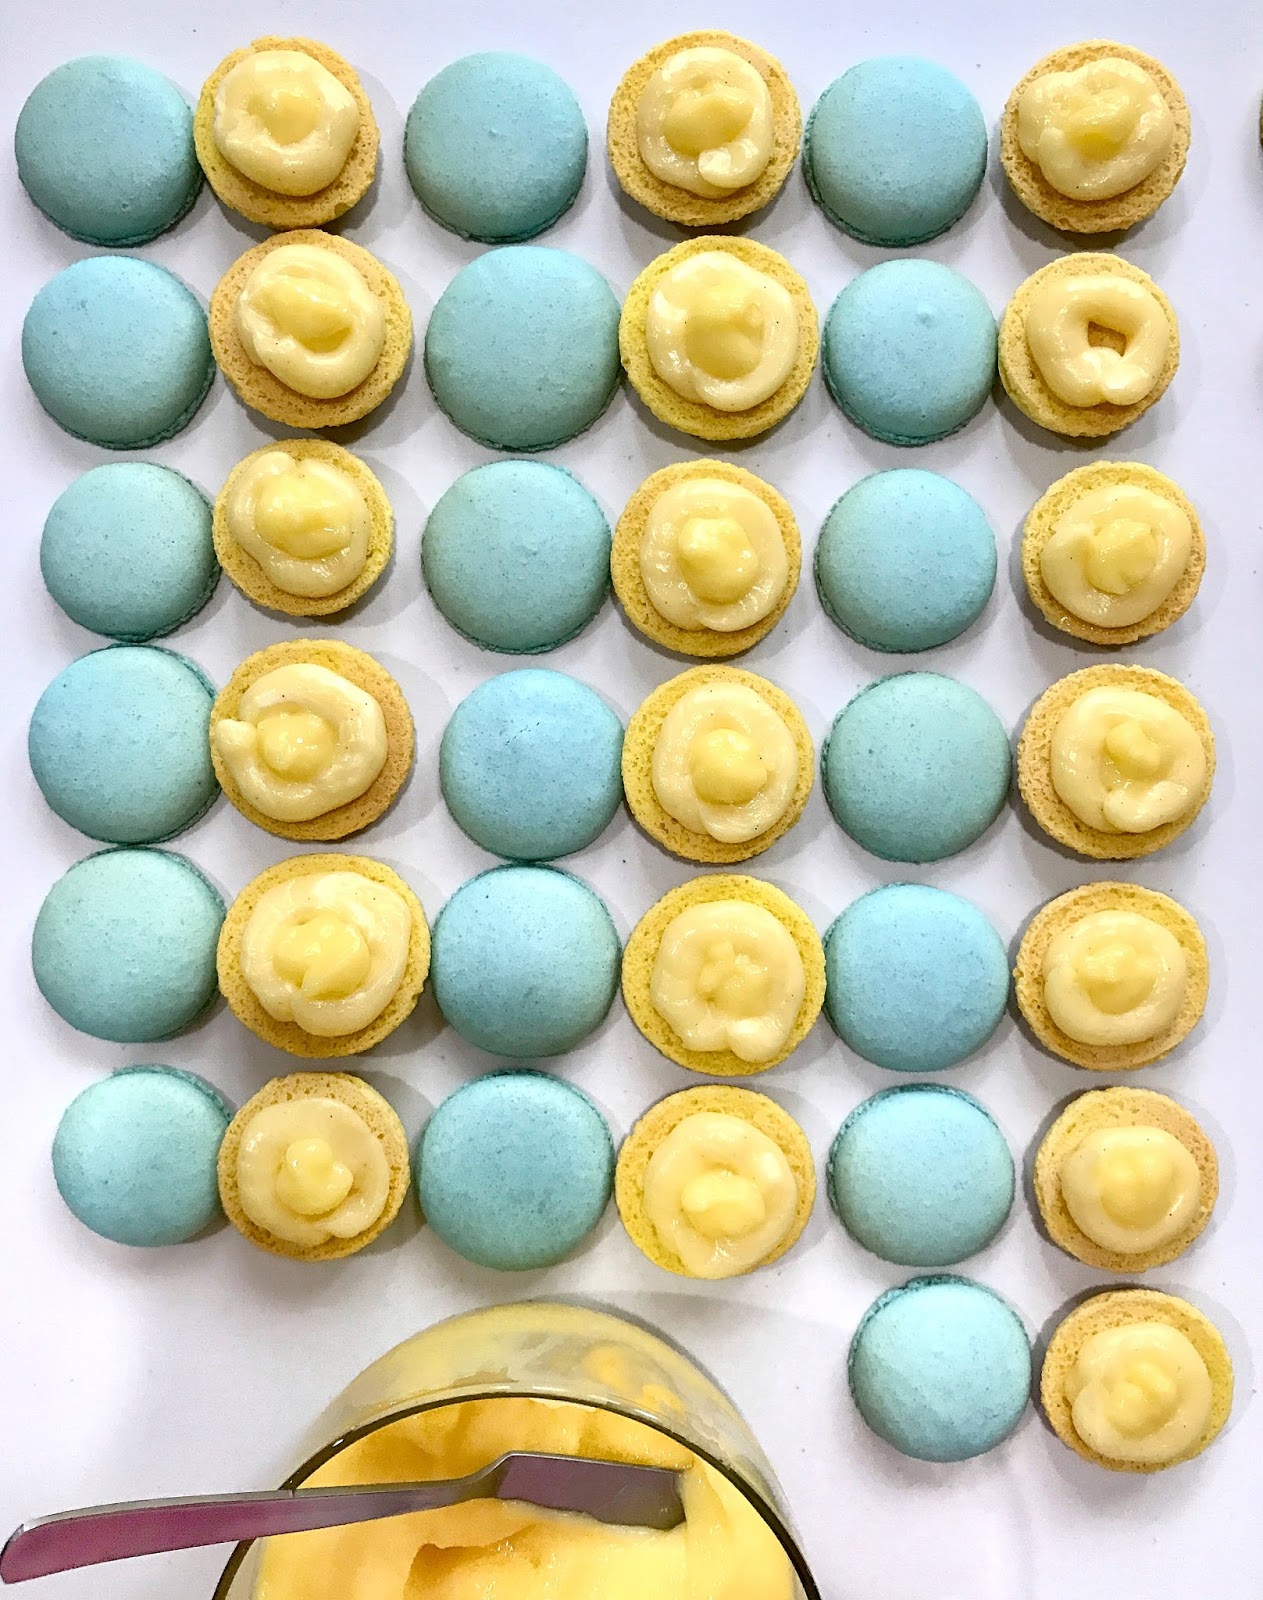 Lemon Curd Macarons filled with tangy lemon curd